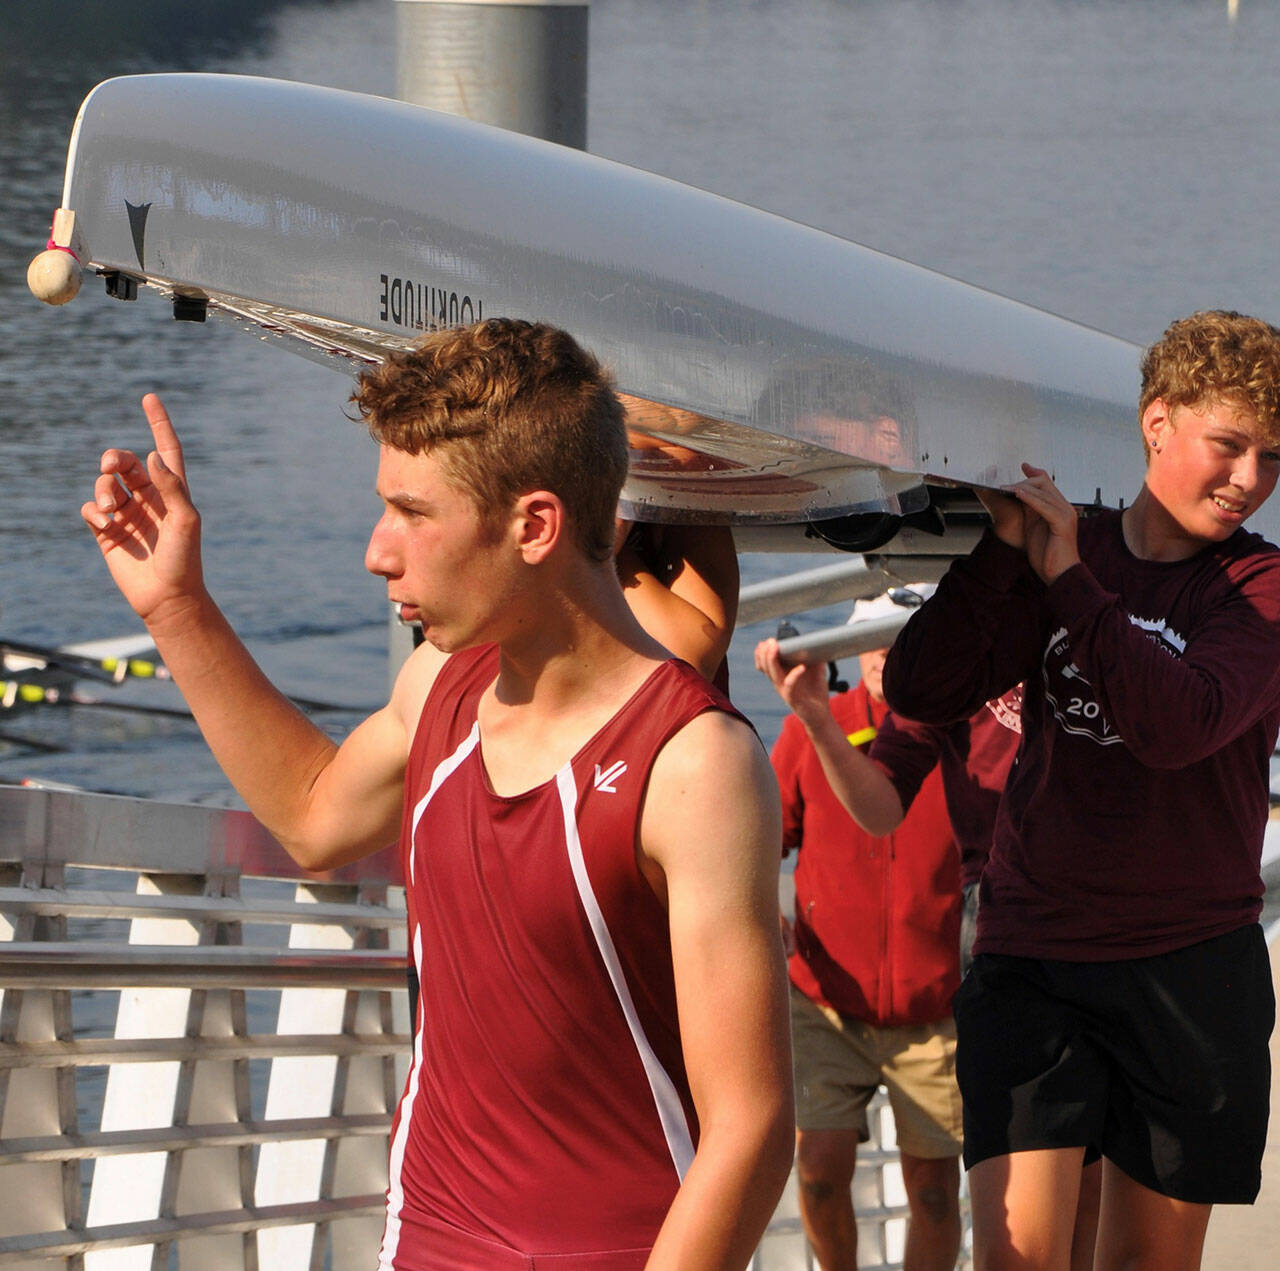 Two of the five members of the Men’s Junior Novice Coxed Quad, Briar Guenther (center) and Emmet Cox (right), after their silver medal performance (Amie Macnab Photo).